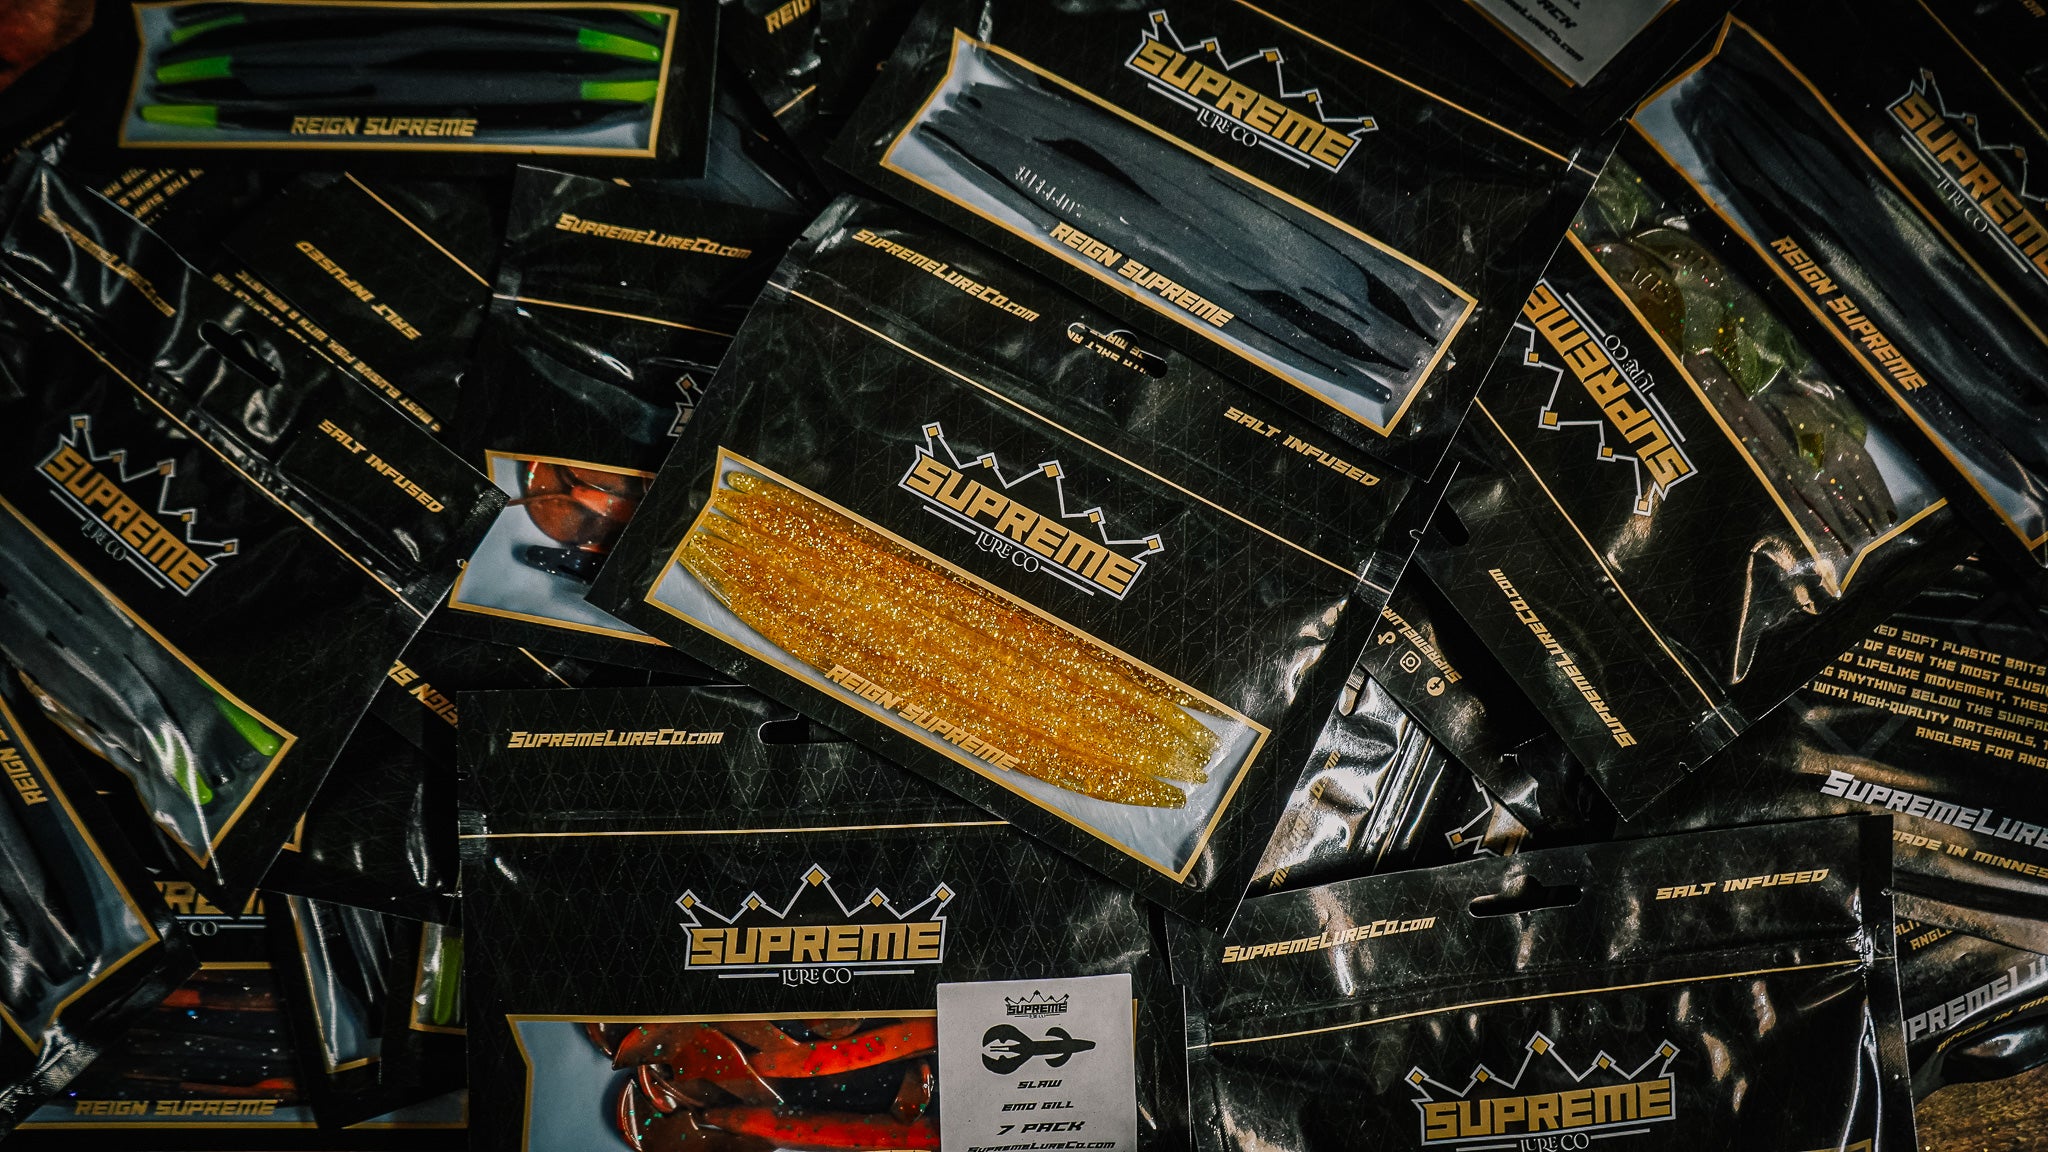 Shop Supreme Lure Co for sale soft plastic baits hand poured Bass fishing Trout fishing tournament salt infused Reign Supreme Black and gold company logo 